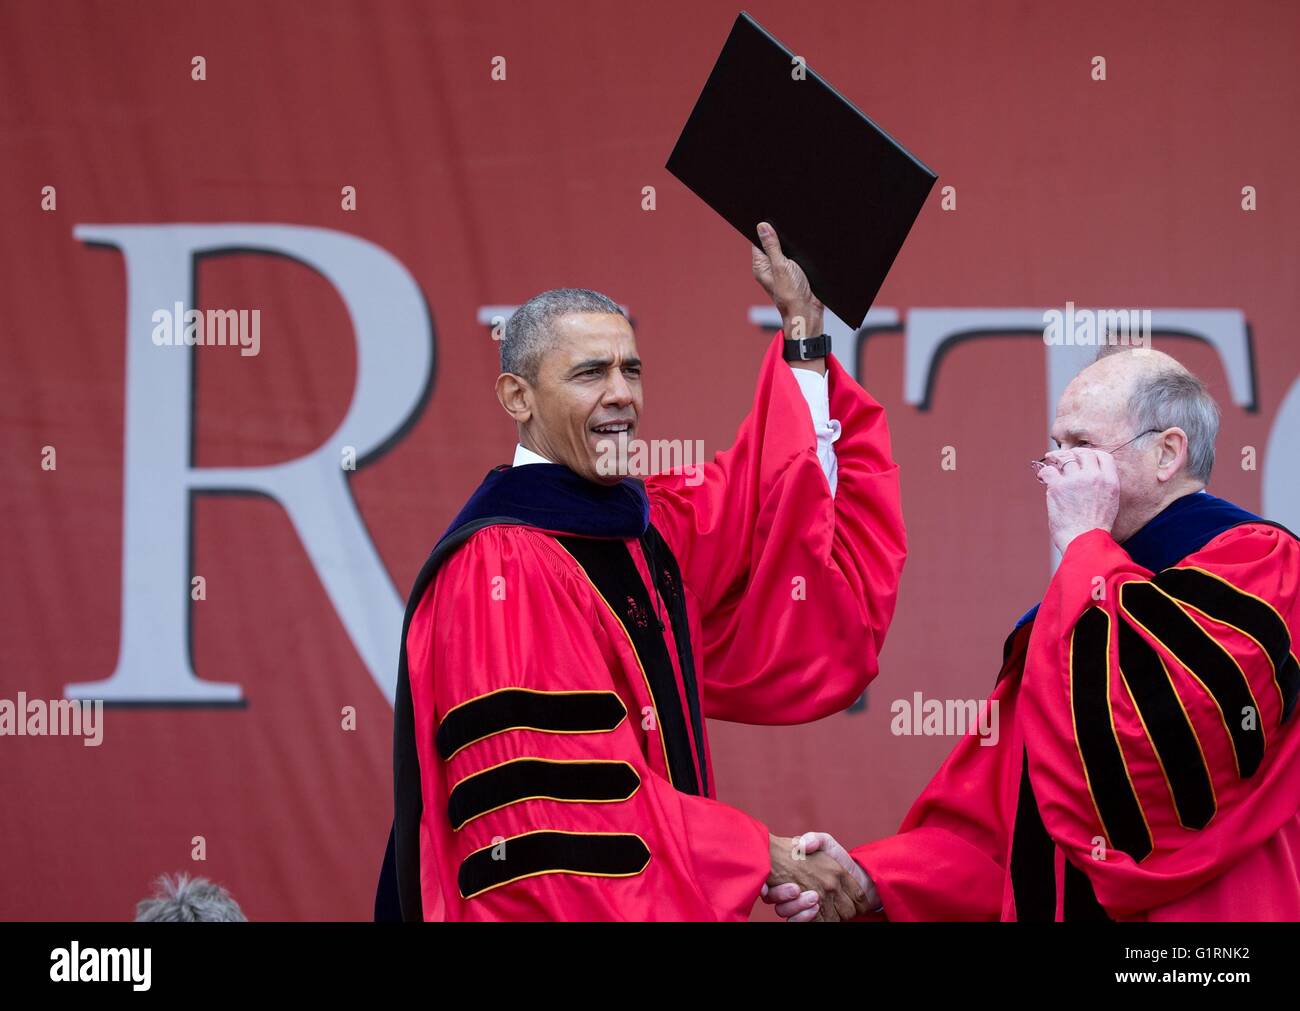 U.S President Barack Obama holds up his diploma after receiving an honorary degree following his commencement address at Rutgers University May 15, 2016 in New Brunswick, New Jersey. Stock Photo